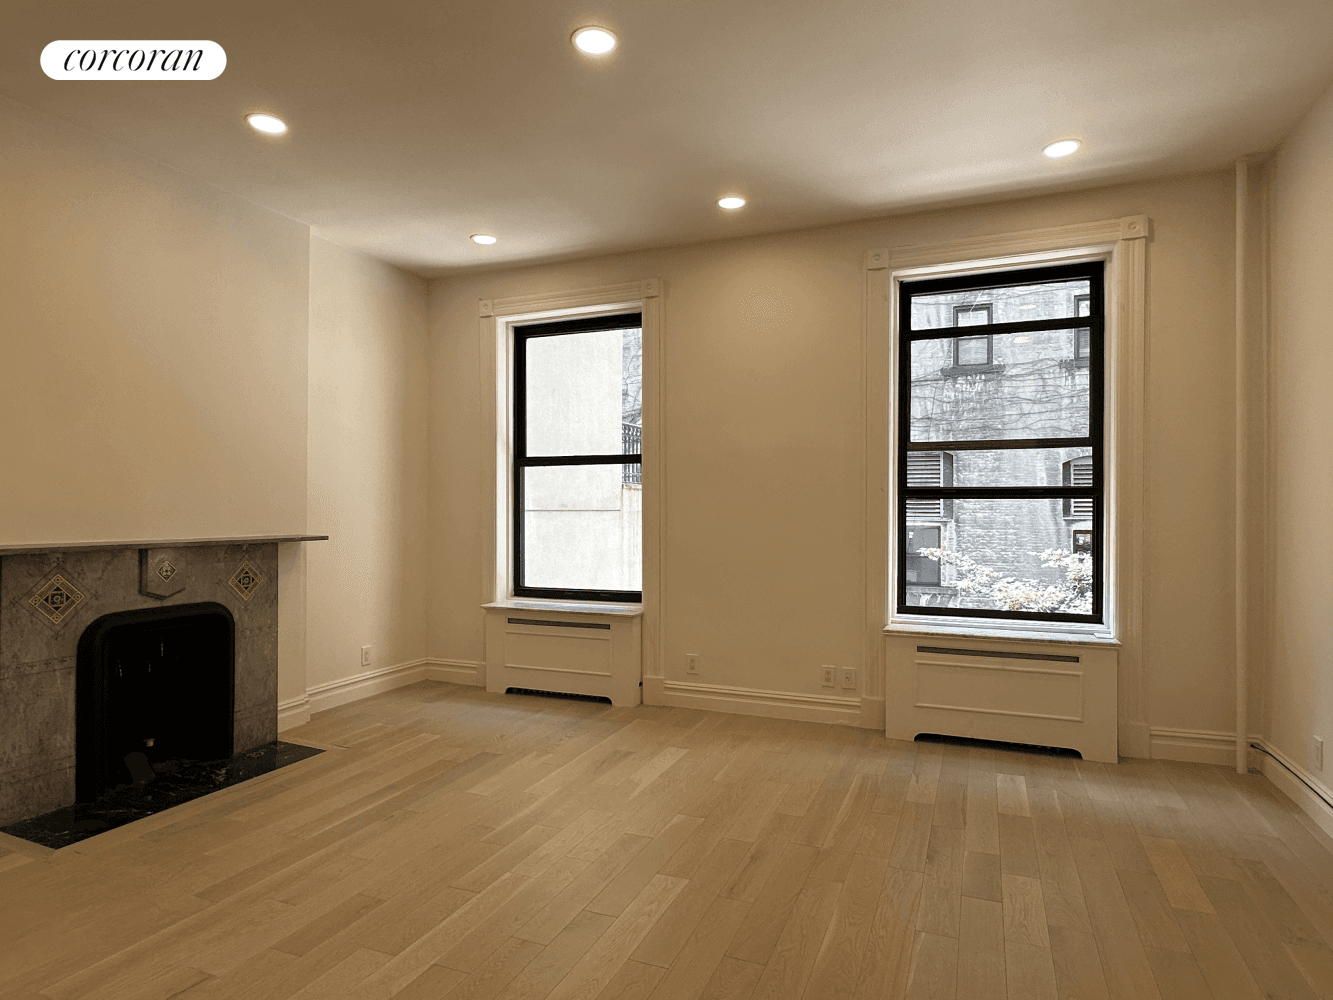 Be the first to live in a newly renovated prime upper east side townhouse duplex with its own entrance and video communication system.